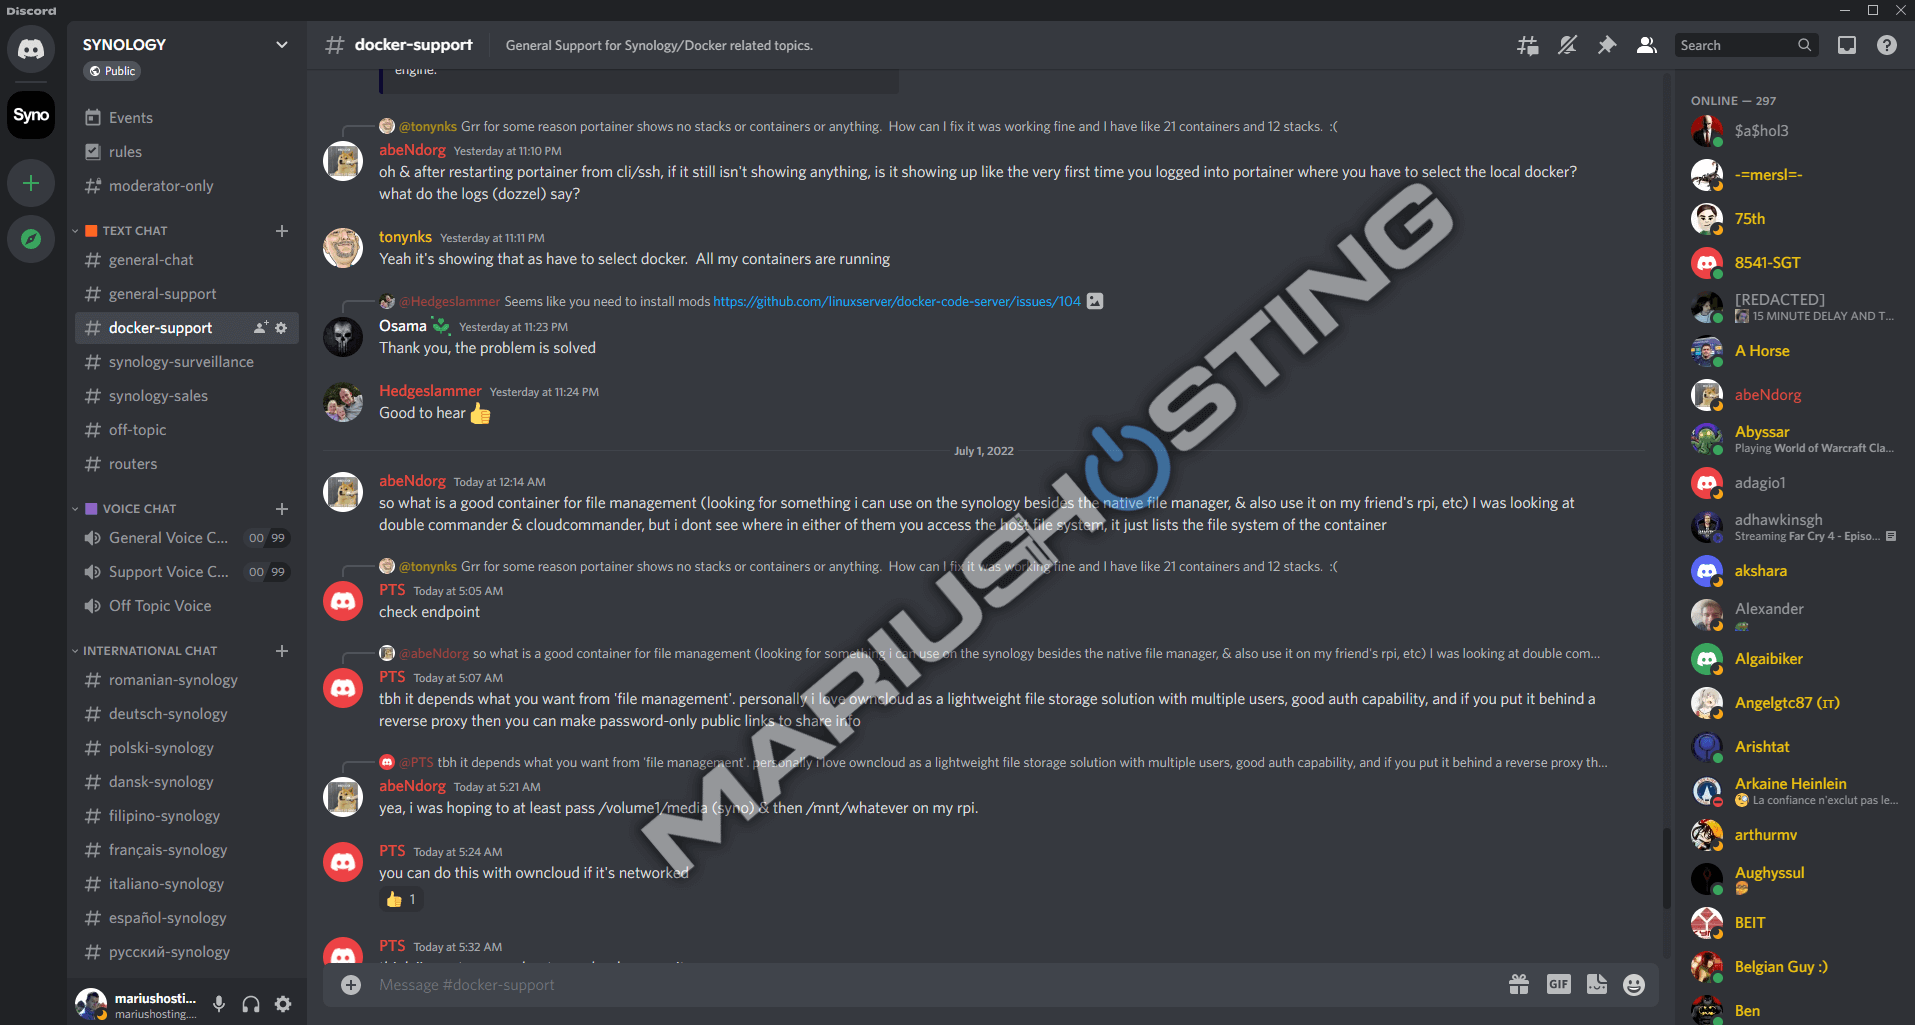 Synology Discord chat unofficial mariushosting